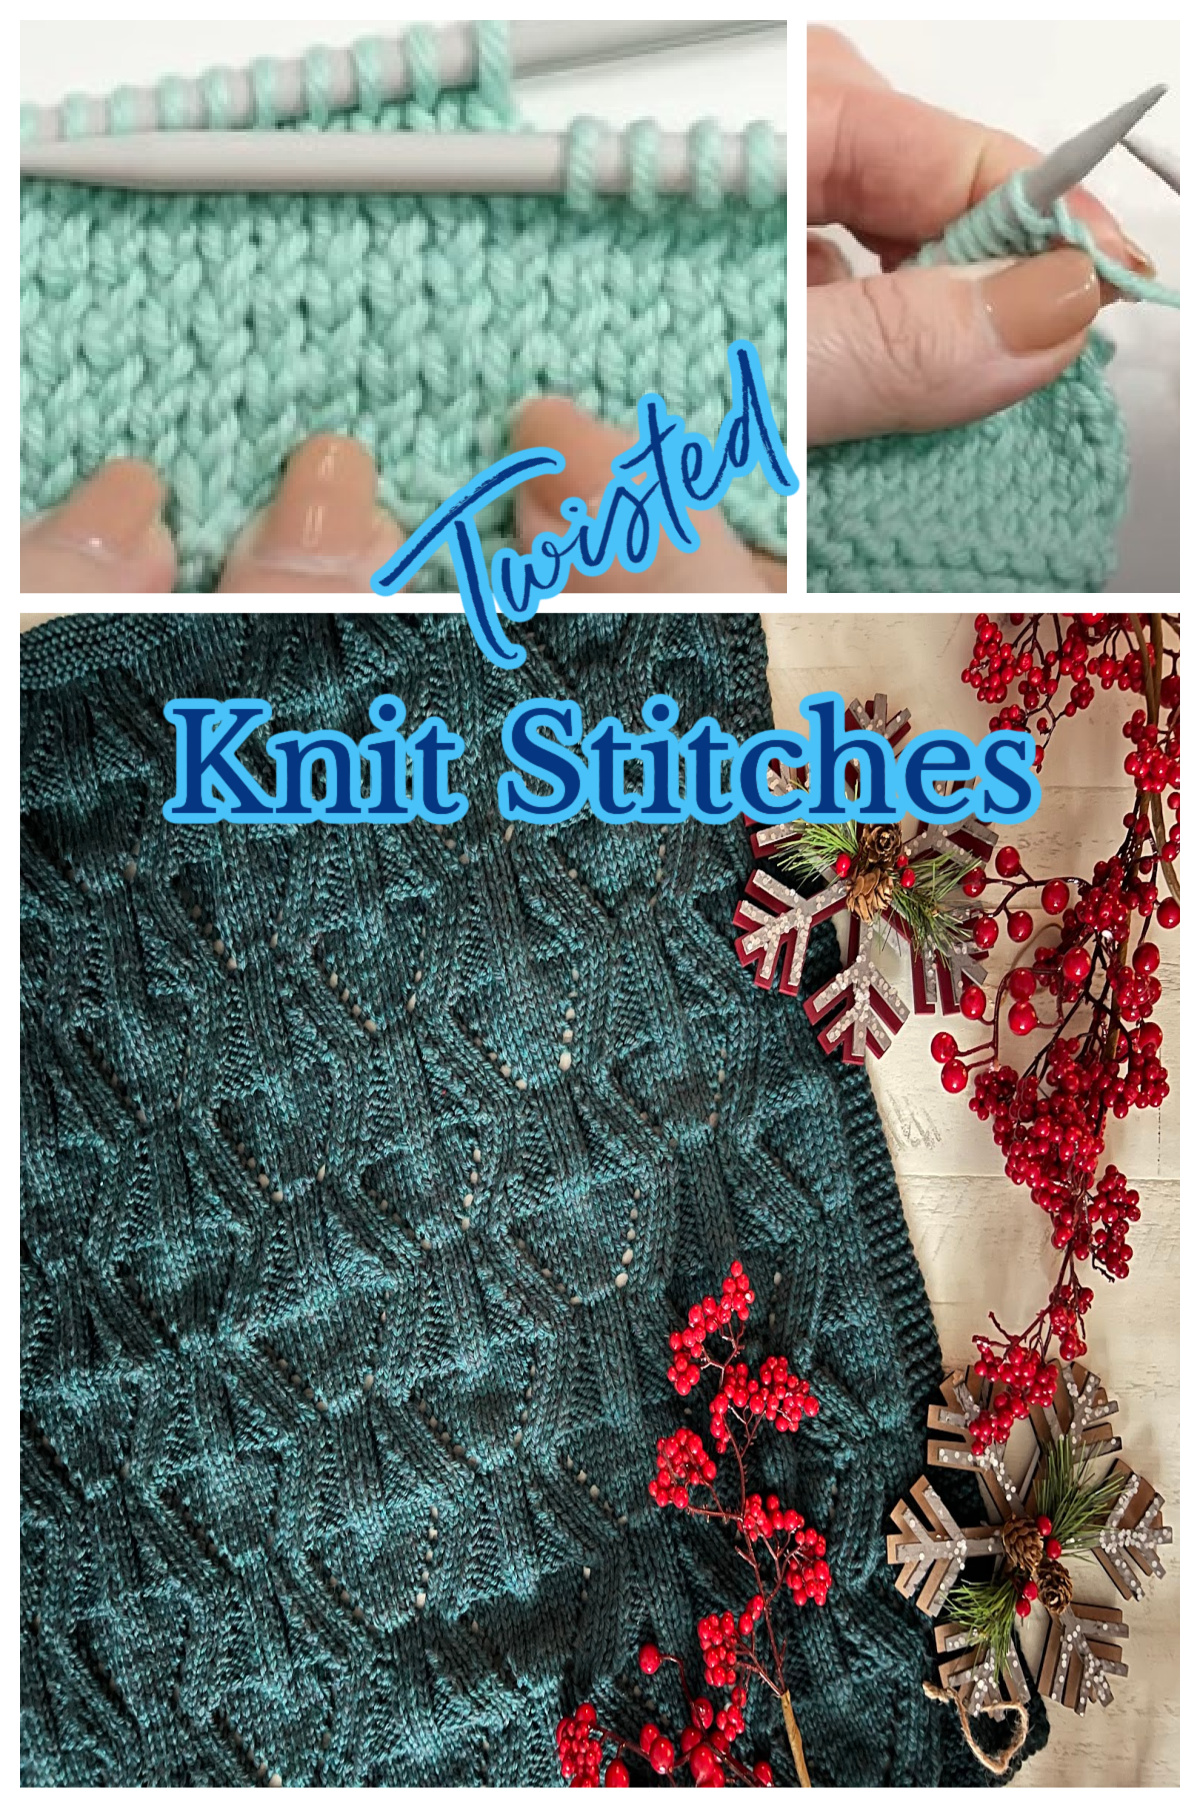 3 image collage of knitting twisted stitches. Top 2 show twisted stitches on alternate rows and an incorrectly seated knit stitch on needle, bottom image shows Mistletoe Knit Lace Blanket including intentional twisted knit stitches.